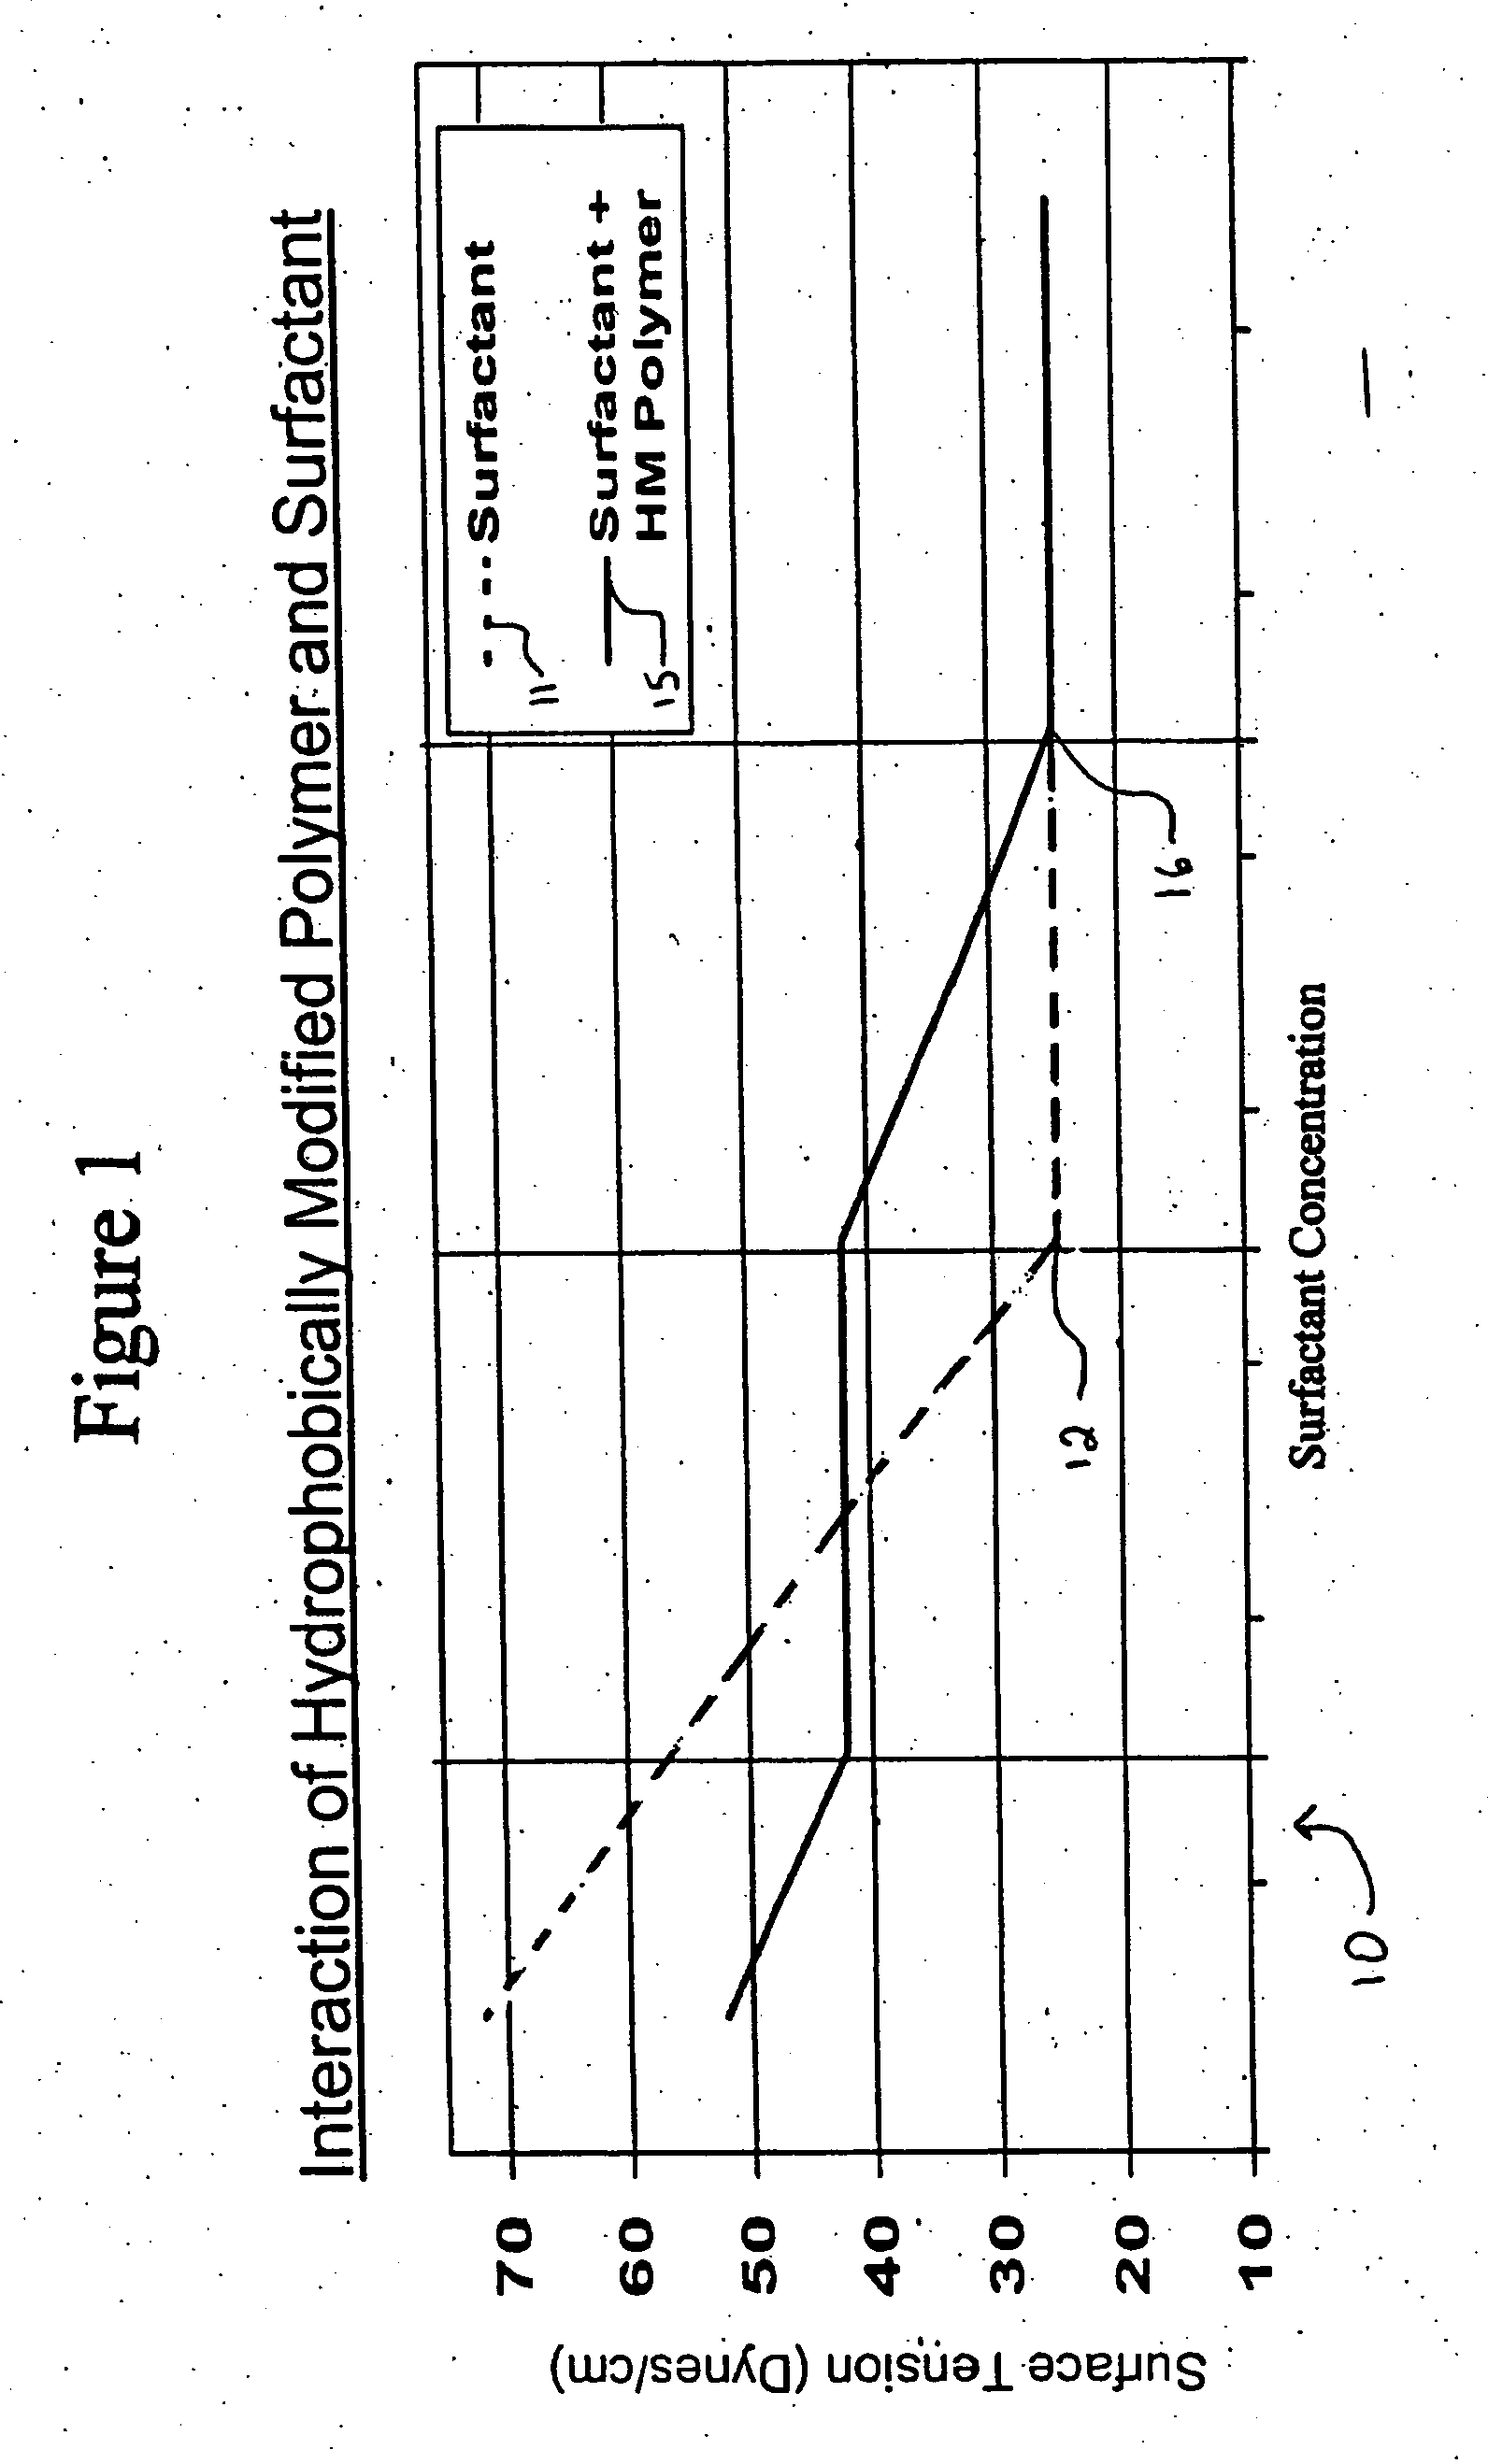 Low-irritation compositions and methods of making the same